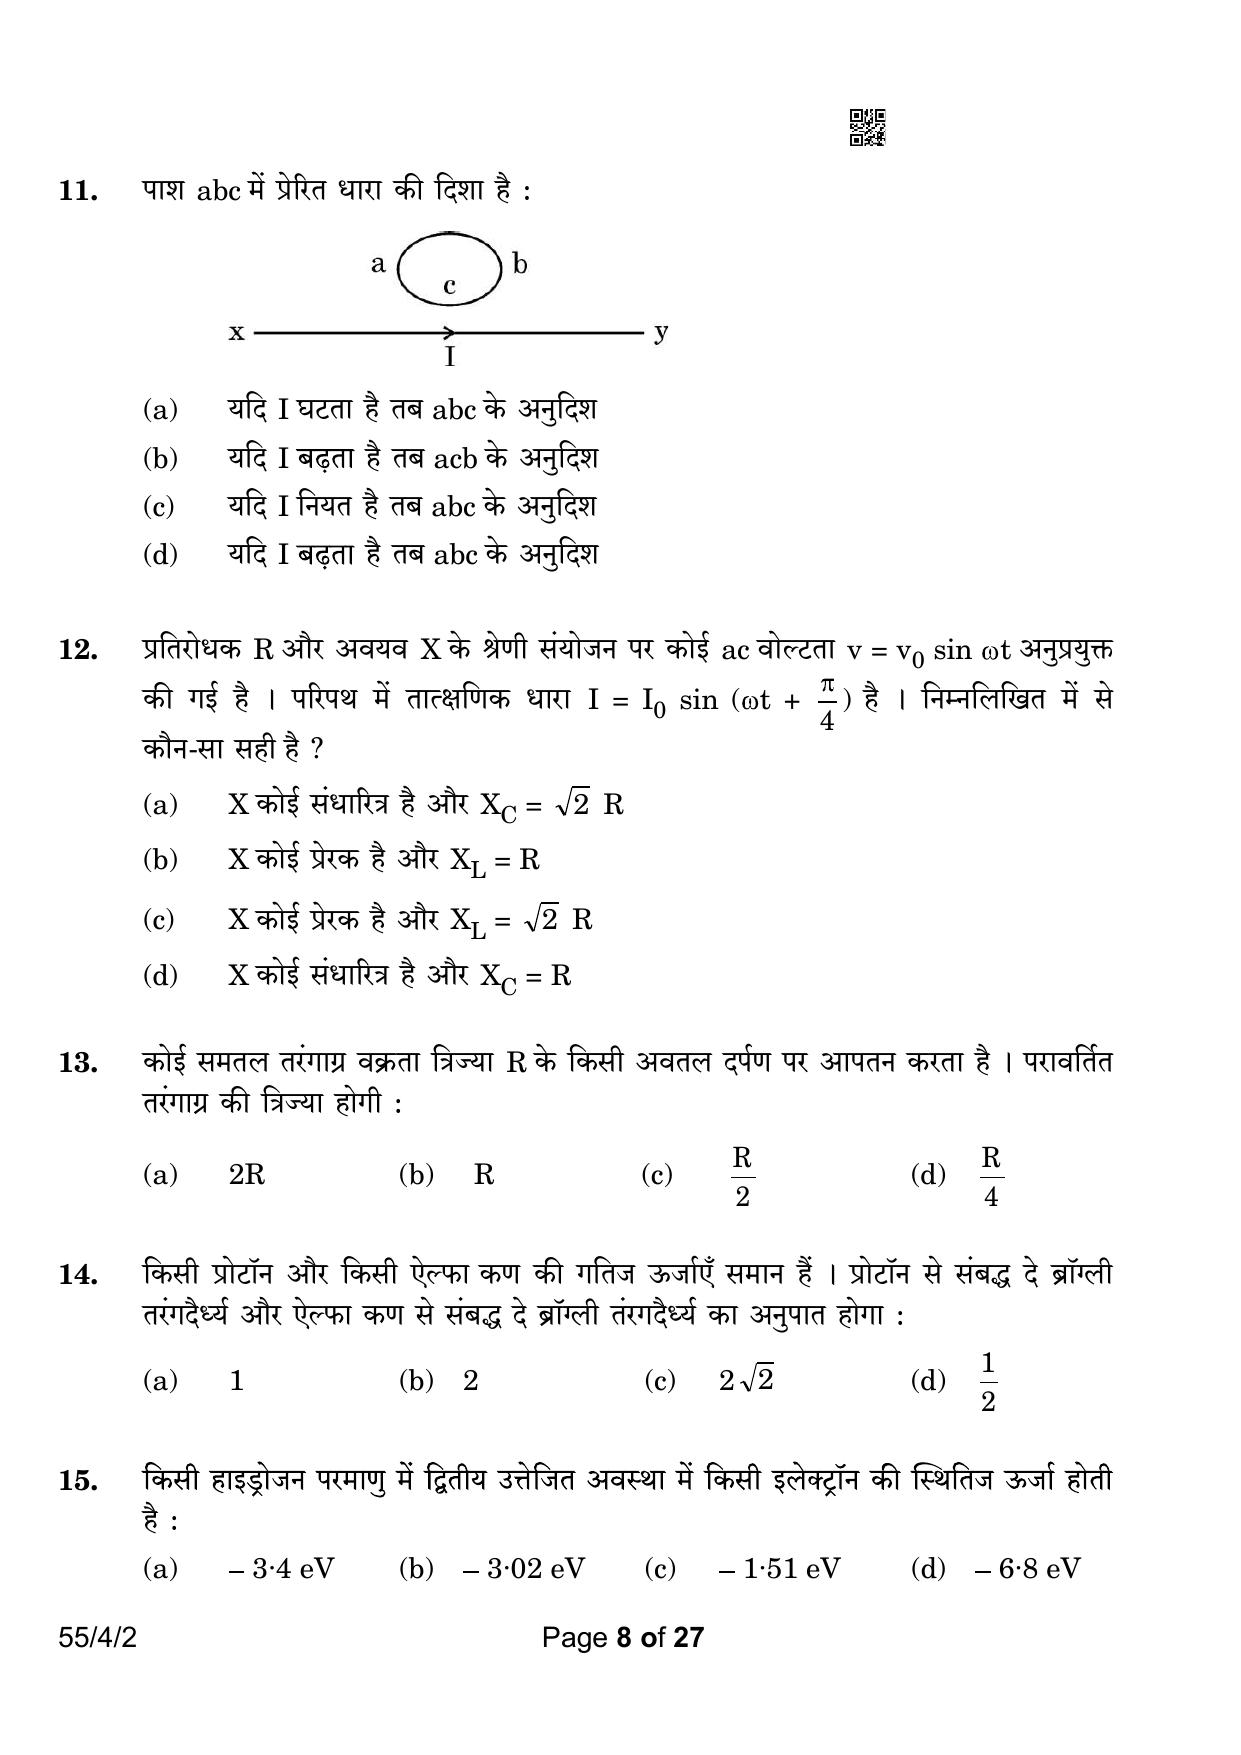 CBSE Class 12 55-4-2 Physics 2023 Question Paper - Page 8